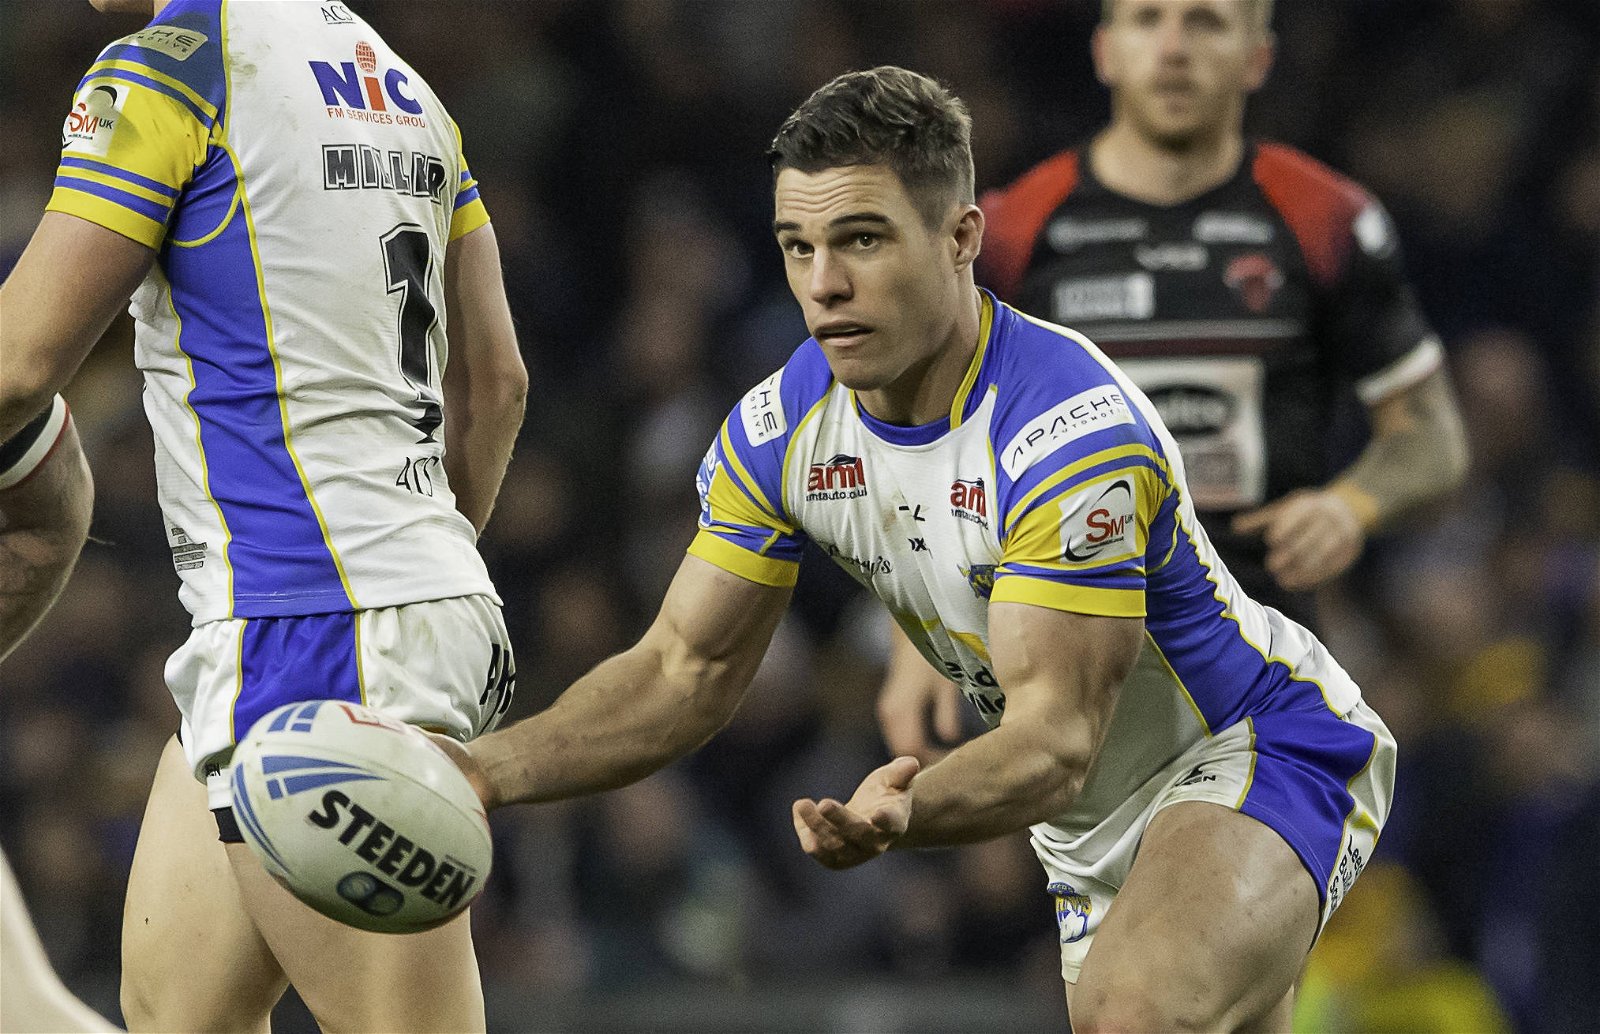 Leeds Rhinos will once again appear on Sky Sports Main Event.